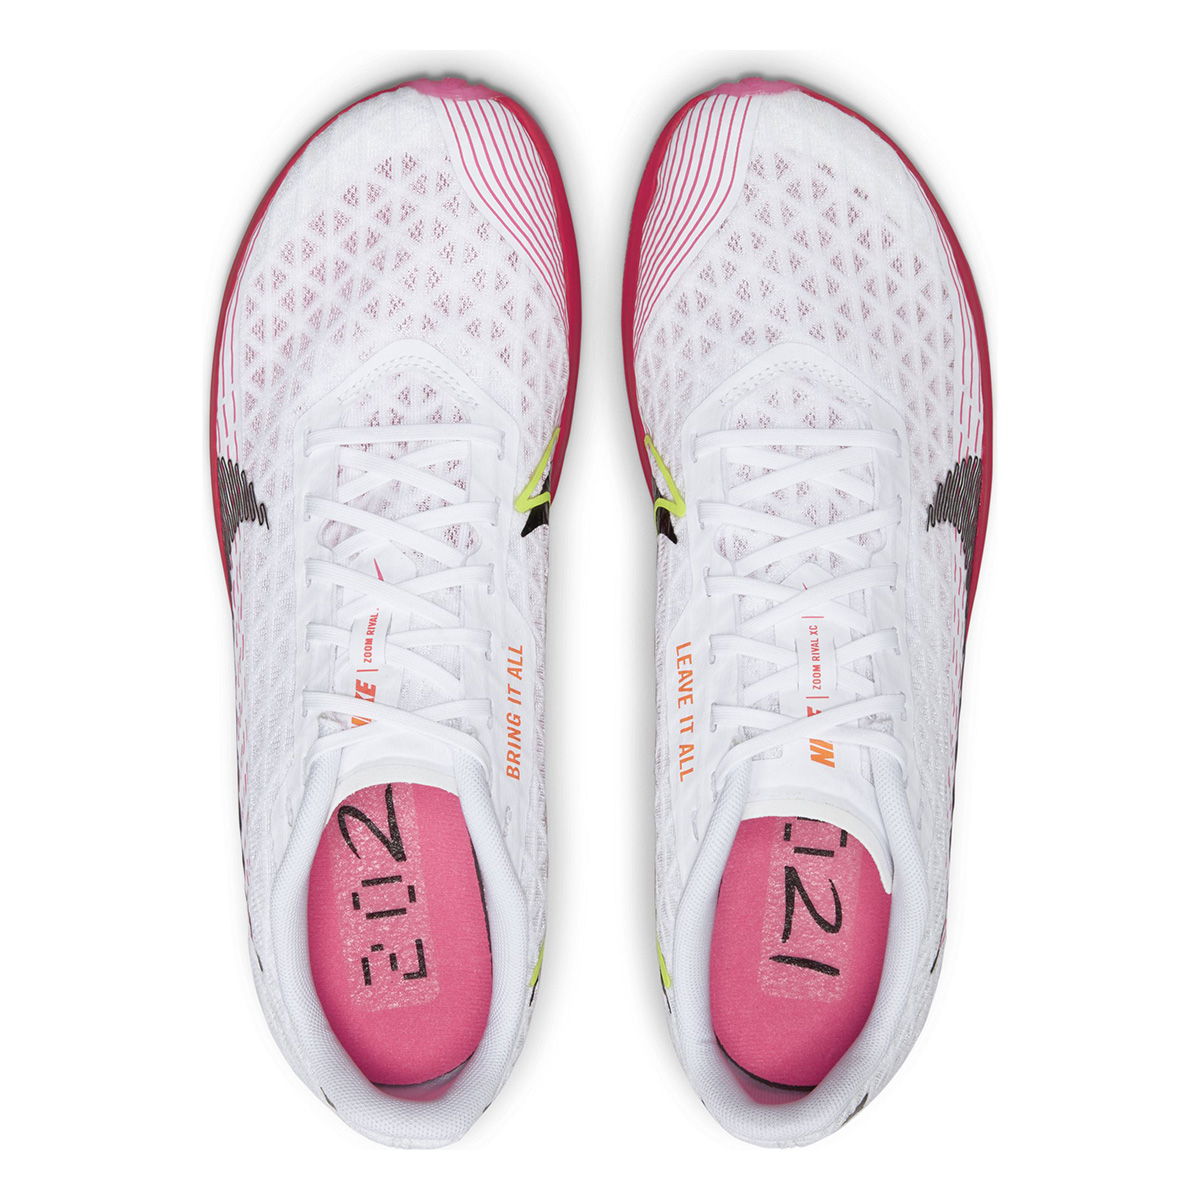 Nike Zoom Rival XC 5, , large image number null